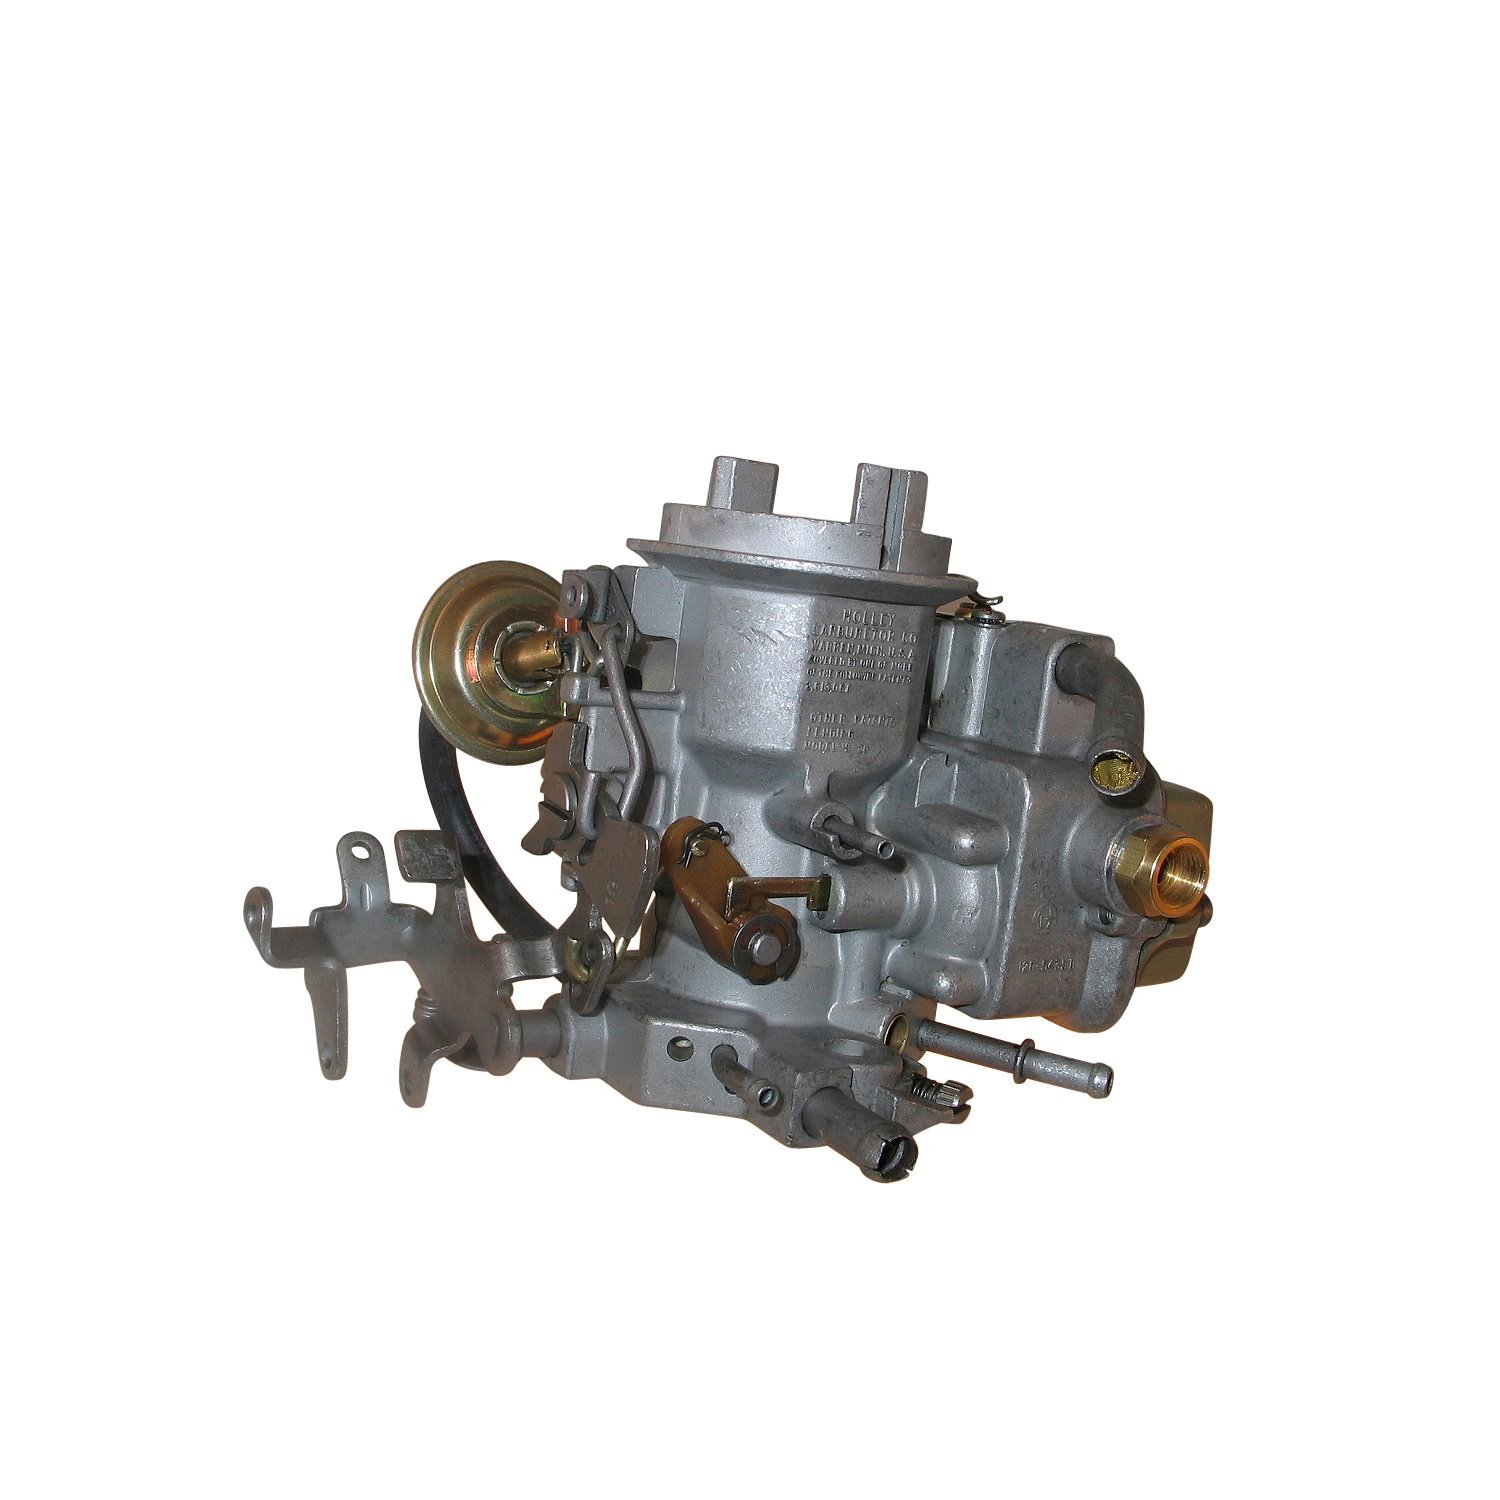 6-6156 Holley Remanufactured Carburetor, 1920-Style